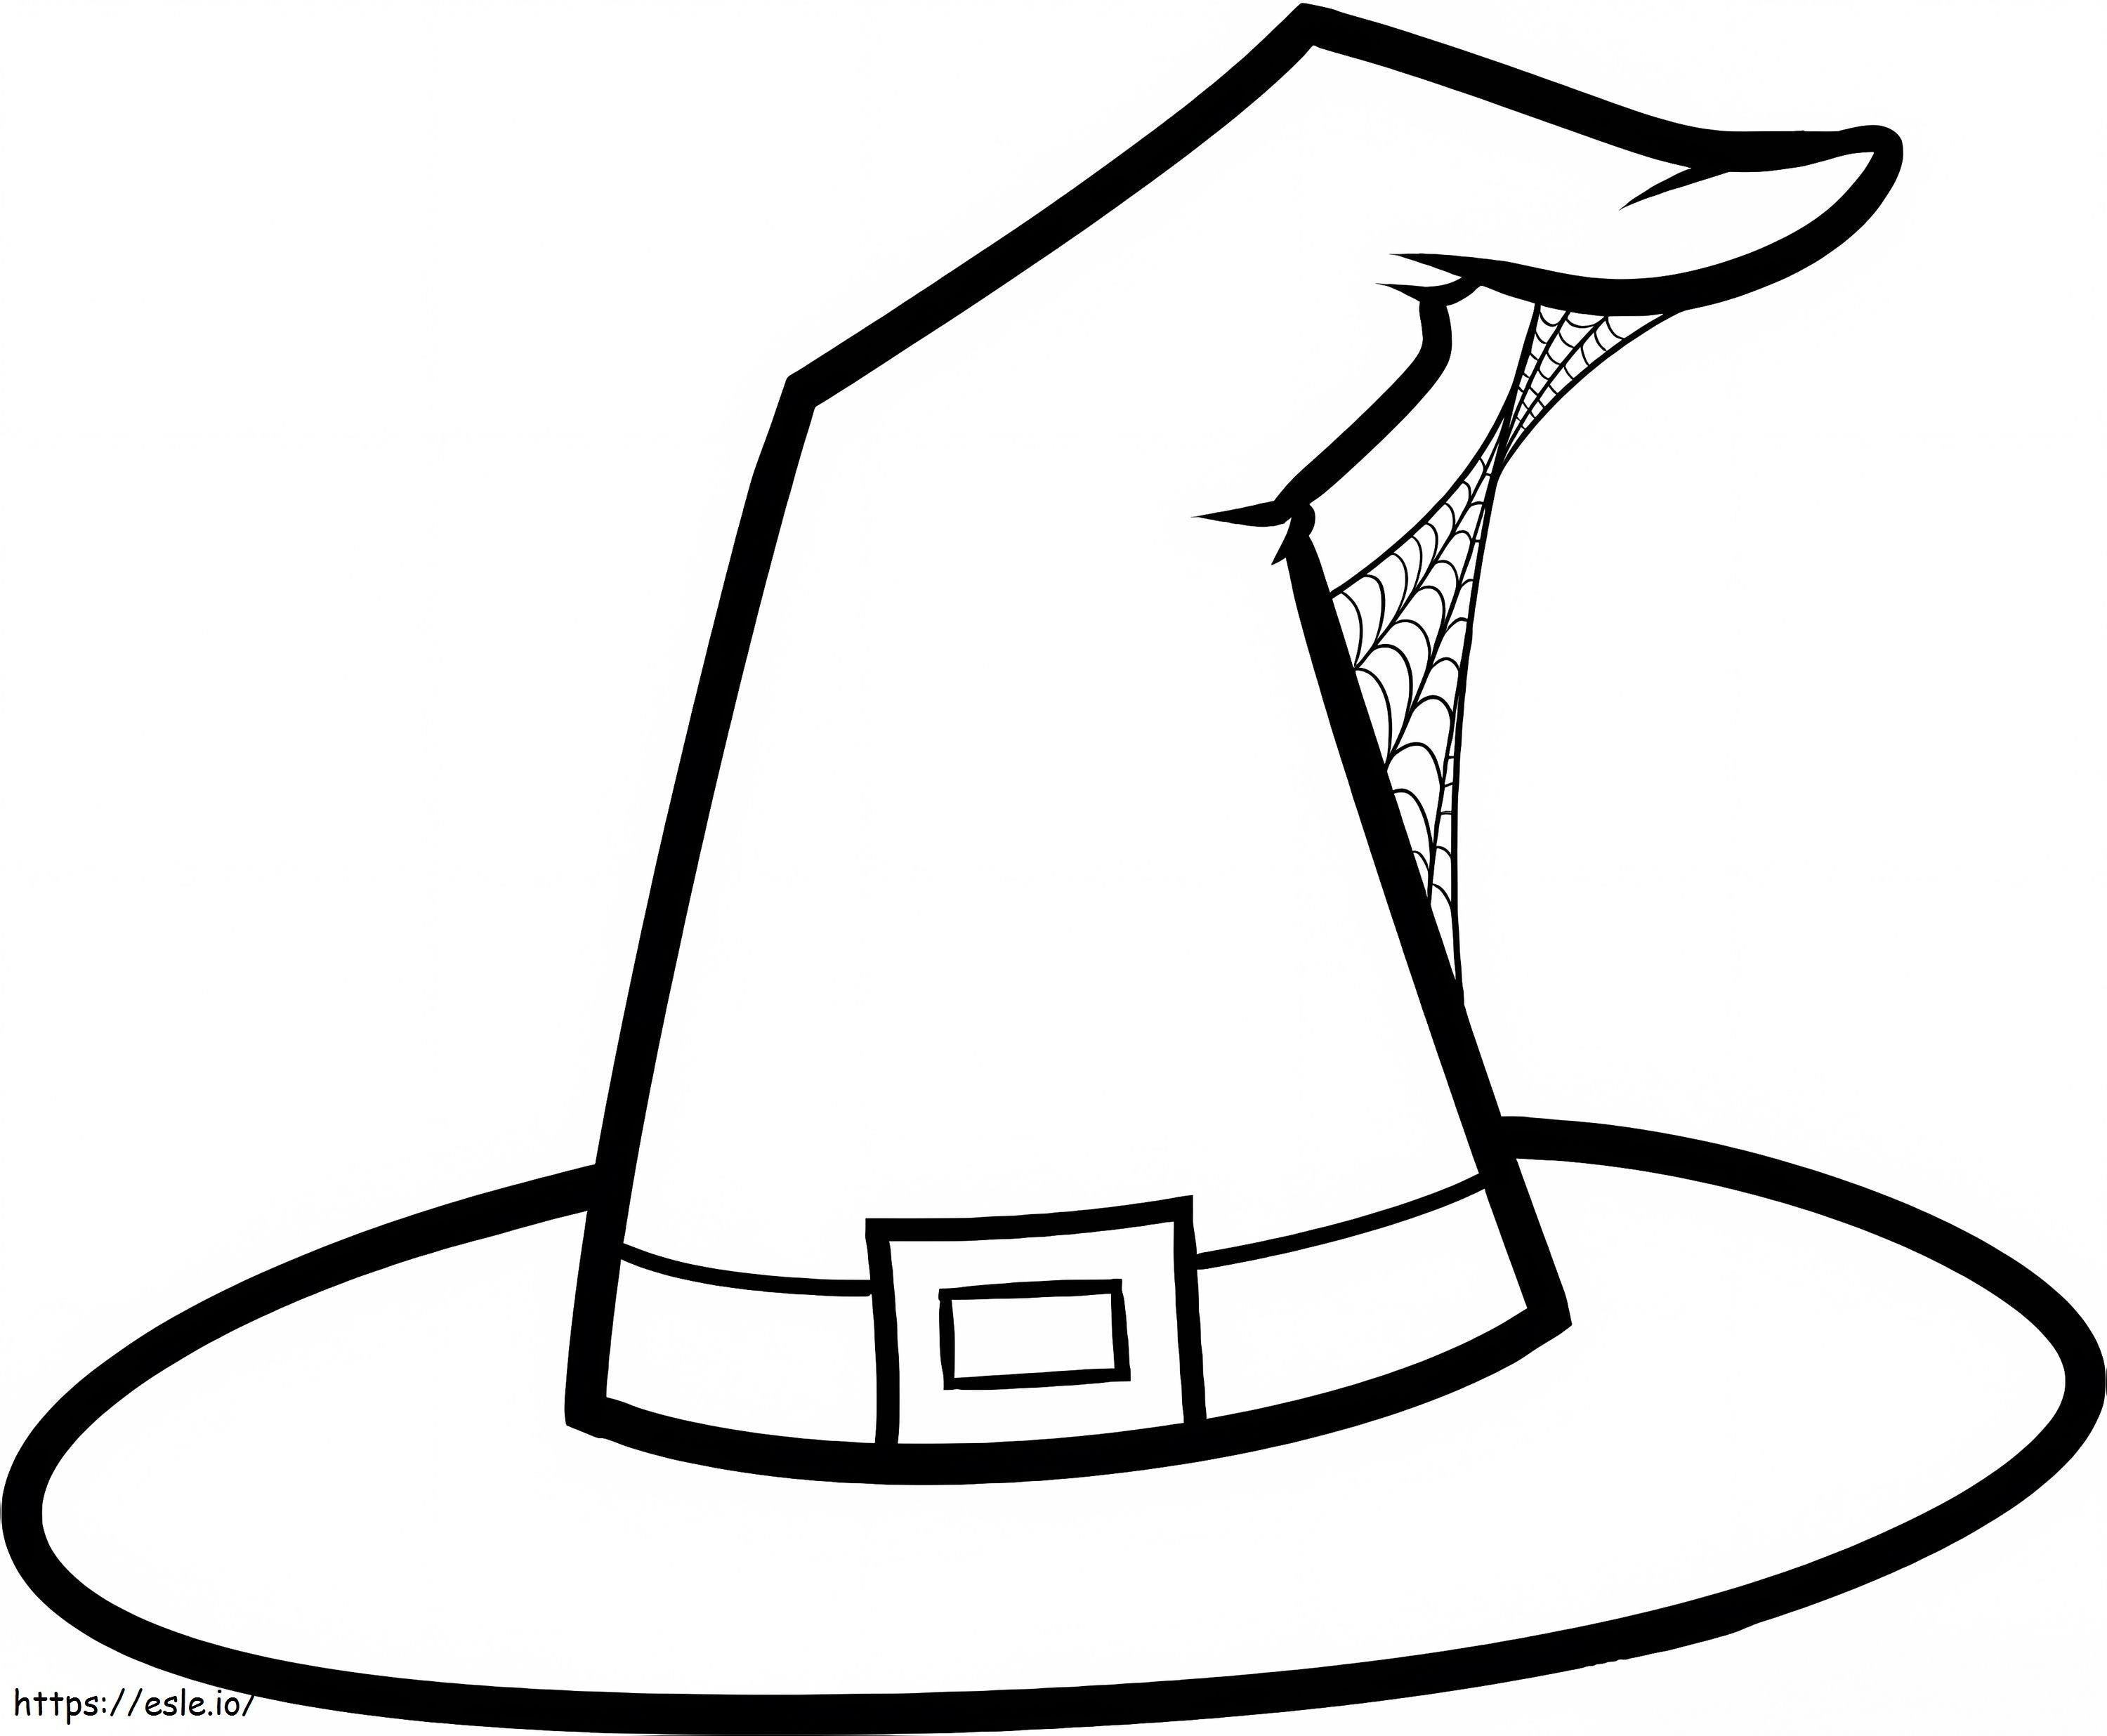 Witch Hat And Spider Web coloring page